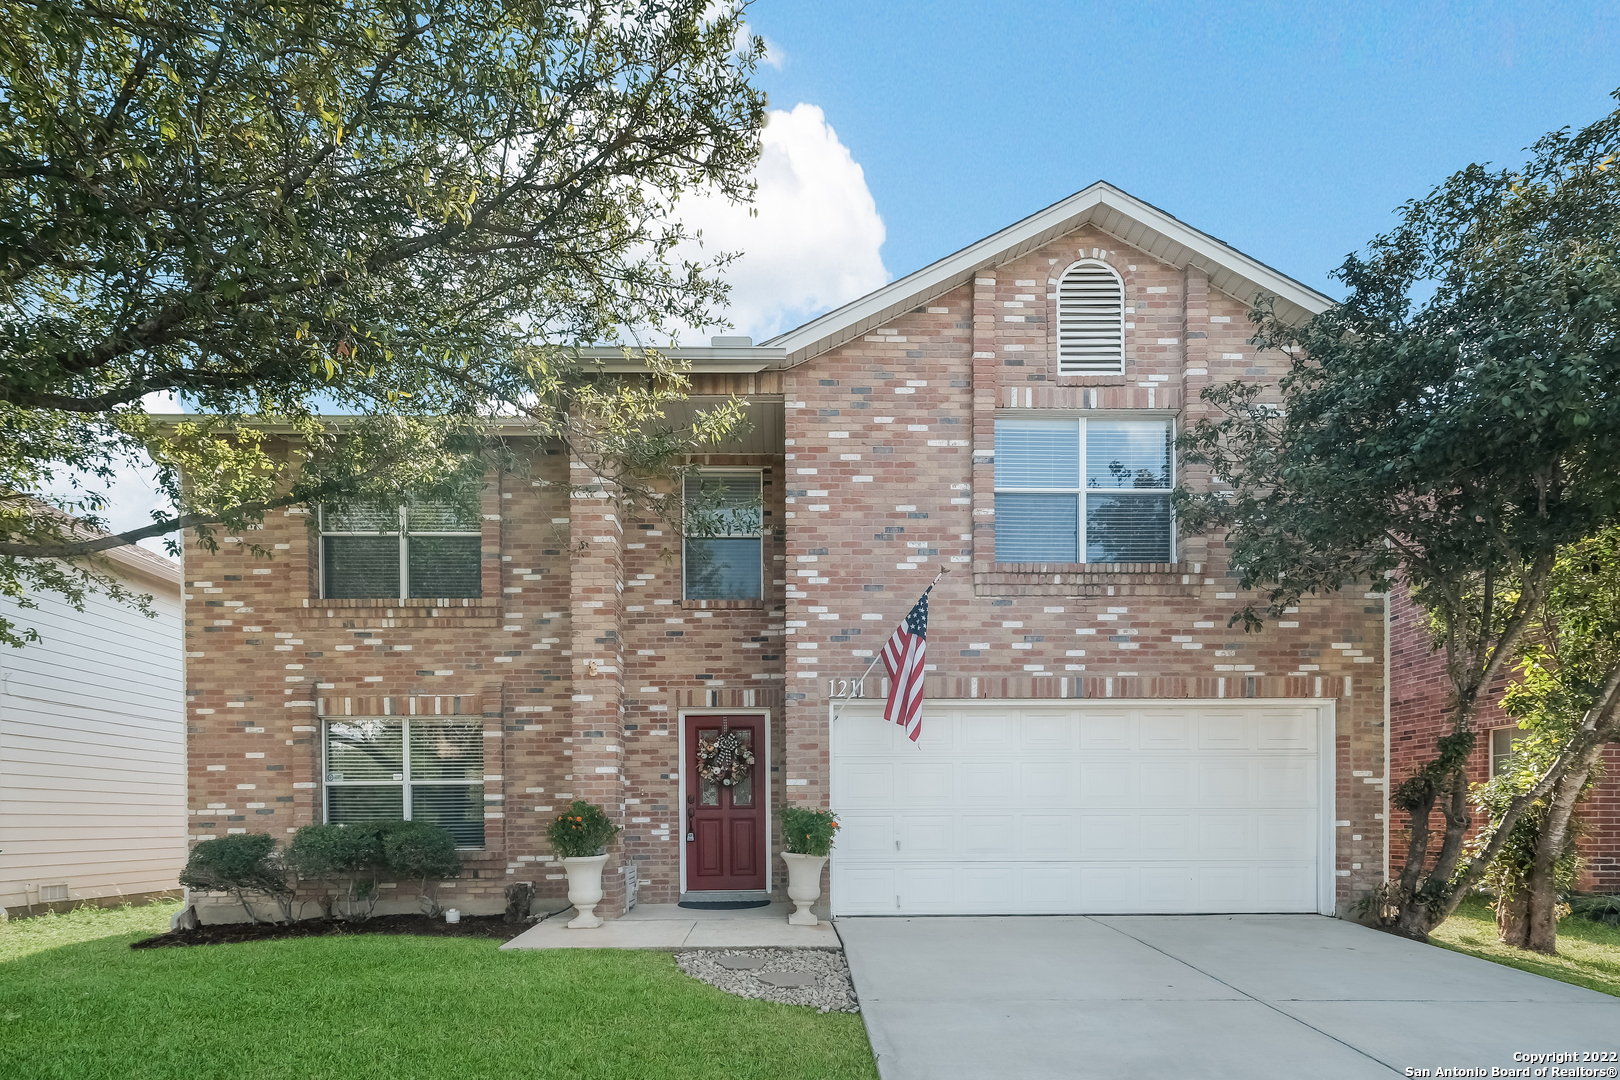 Be first to this Freshly Updated Home with New Paint and Carpet, Gorgeous Wood-Like Tile Downstairs, 4 Spacious Bedrooms Conveniently Located in Northwest San Antonio minutes from Highway 151, 410, 1604, Lackland AFB, Sea World, and Westover Hills! Fall in Love with the Welcoming Curb Appeal, Abundant Natural Light (23 windows!), new Lighting Fixtures, 3 Living/Flex Spaces including a HUGE Gameroom upstairs with Built-In Cabinets and Countertops, and a Spacious Master Bedroom Suite complete with Double Vanities, Garden Tub, Separate Shower, new Flooring, and an Expansive Walk-In Closet! Roof replaced in 2017, HVAC with UV Light replaced in 2019, Water Heater replaced in 2022, Replaced Toilets Sept. 2022, and Washer and Dryer can Stay! Minutes from all Three Schools, Shopping, and Restaurants. Schedule your showing today!